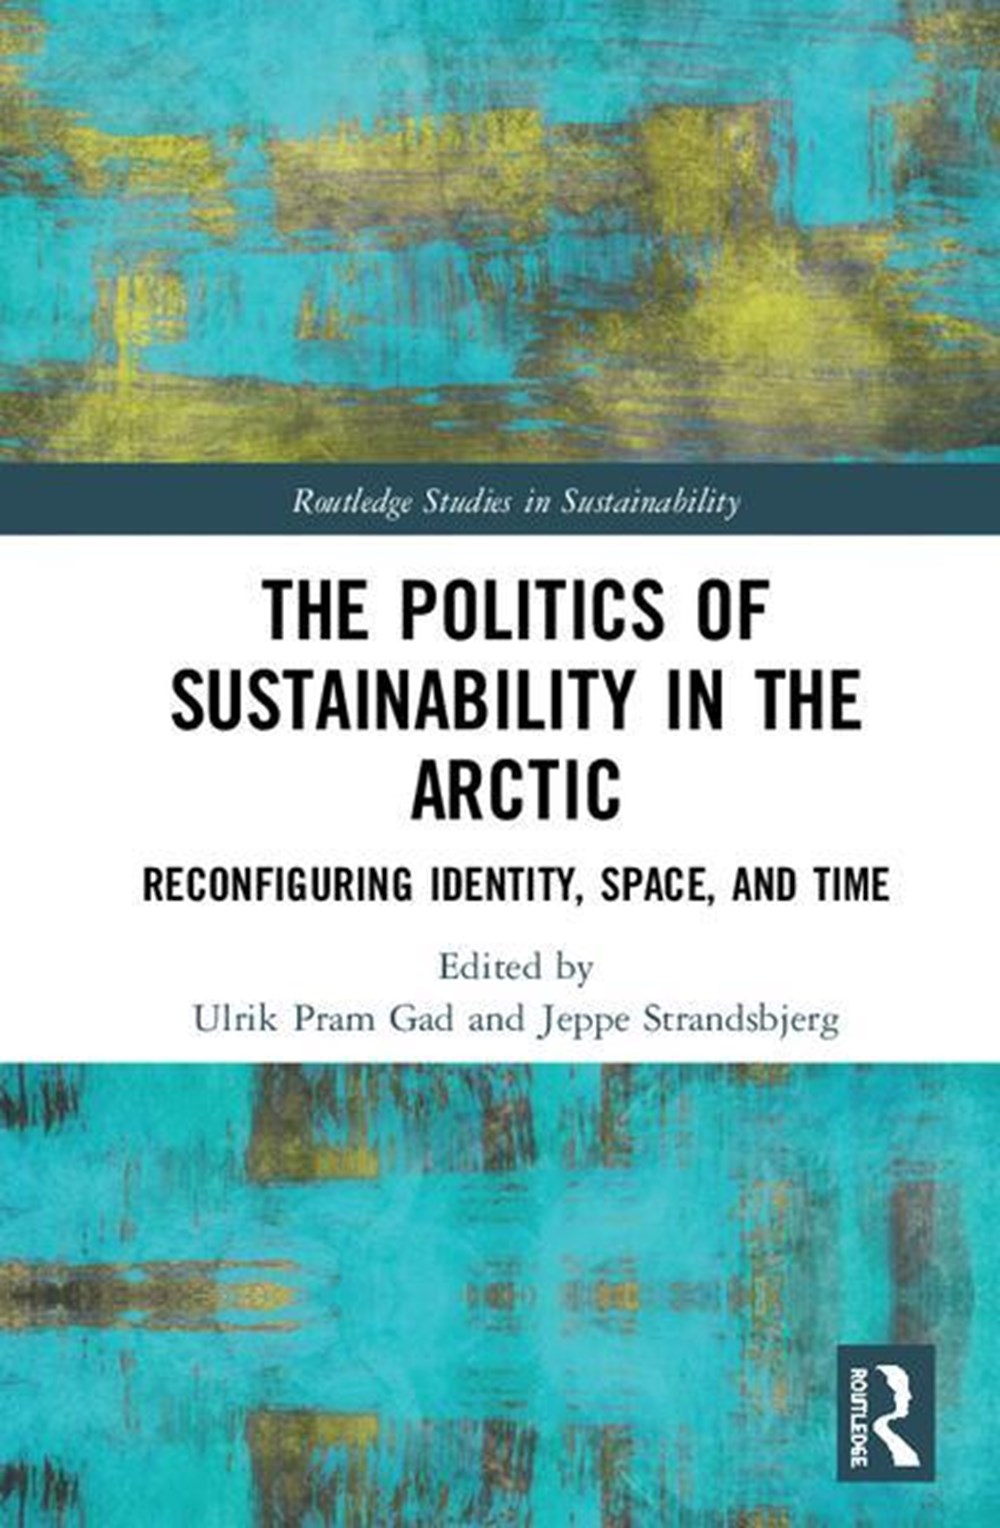 Politics of Sustainability in the Arctic: Reconfiguring Identity, Space, and Time